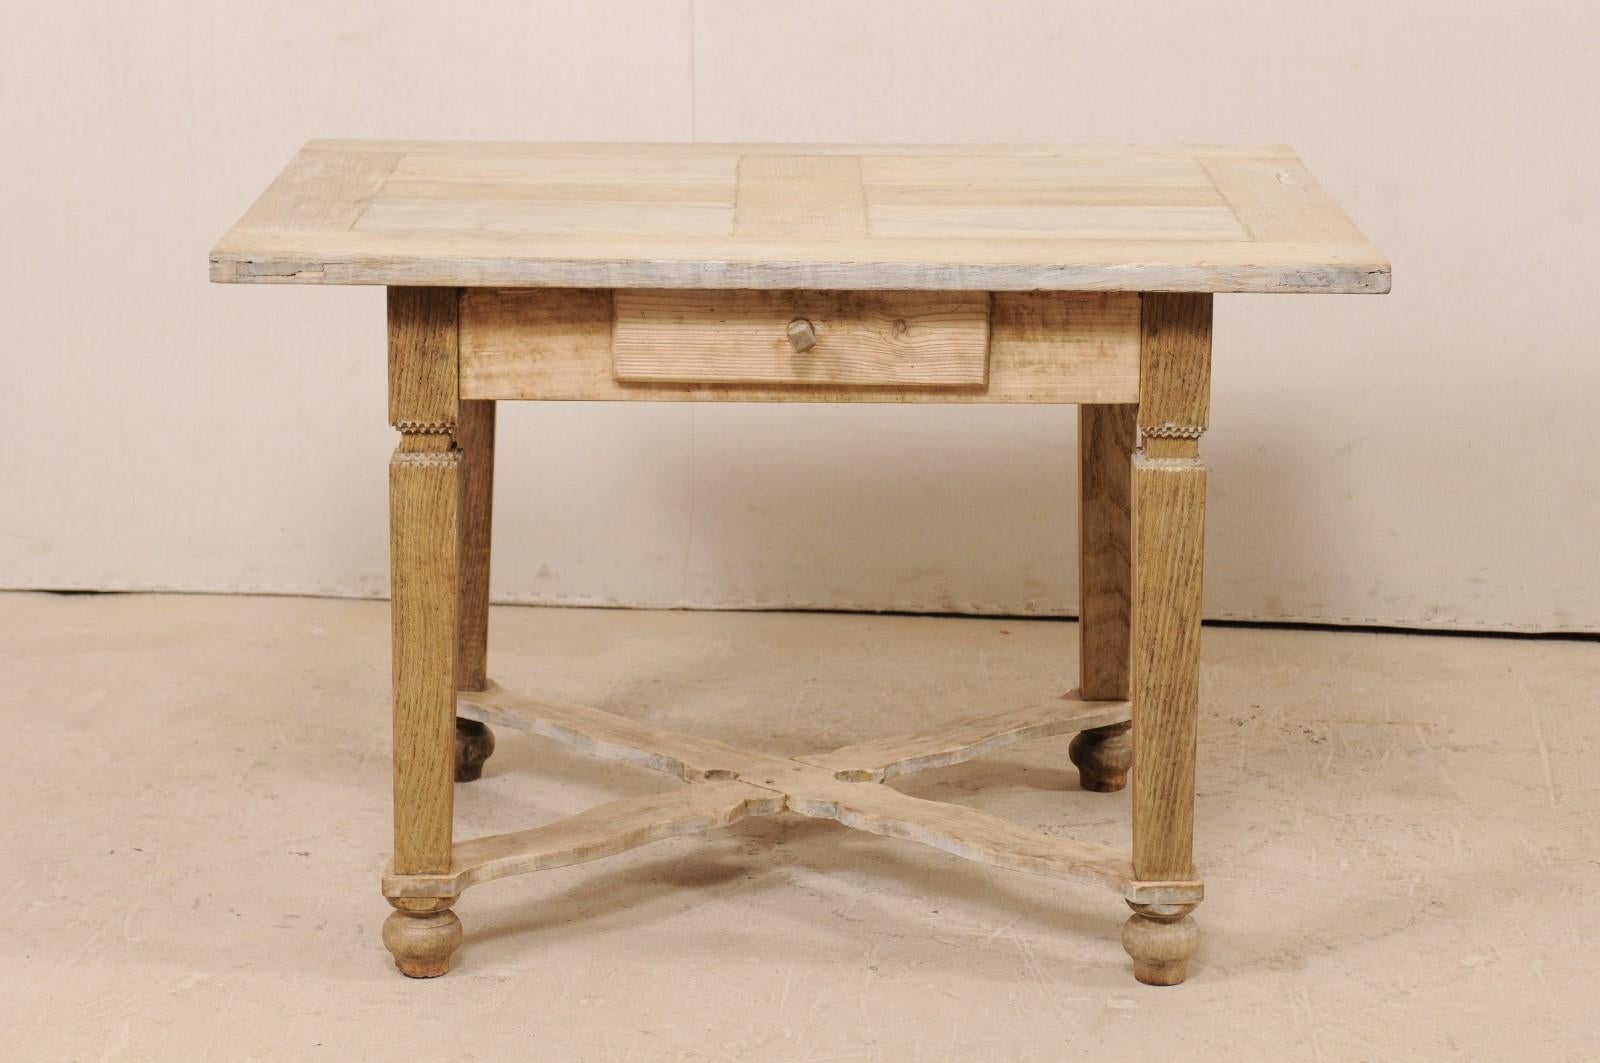 A French early 20th century bleached wood desk or table. This antique table from France features an overhanging rectangular-shaped top, a clean apron with single drawer set into its front centre, and four corner legs which are supported with a